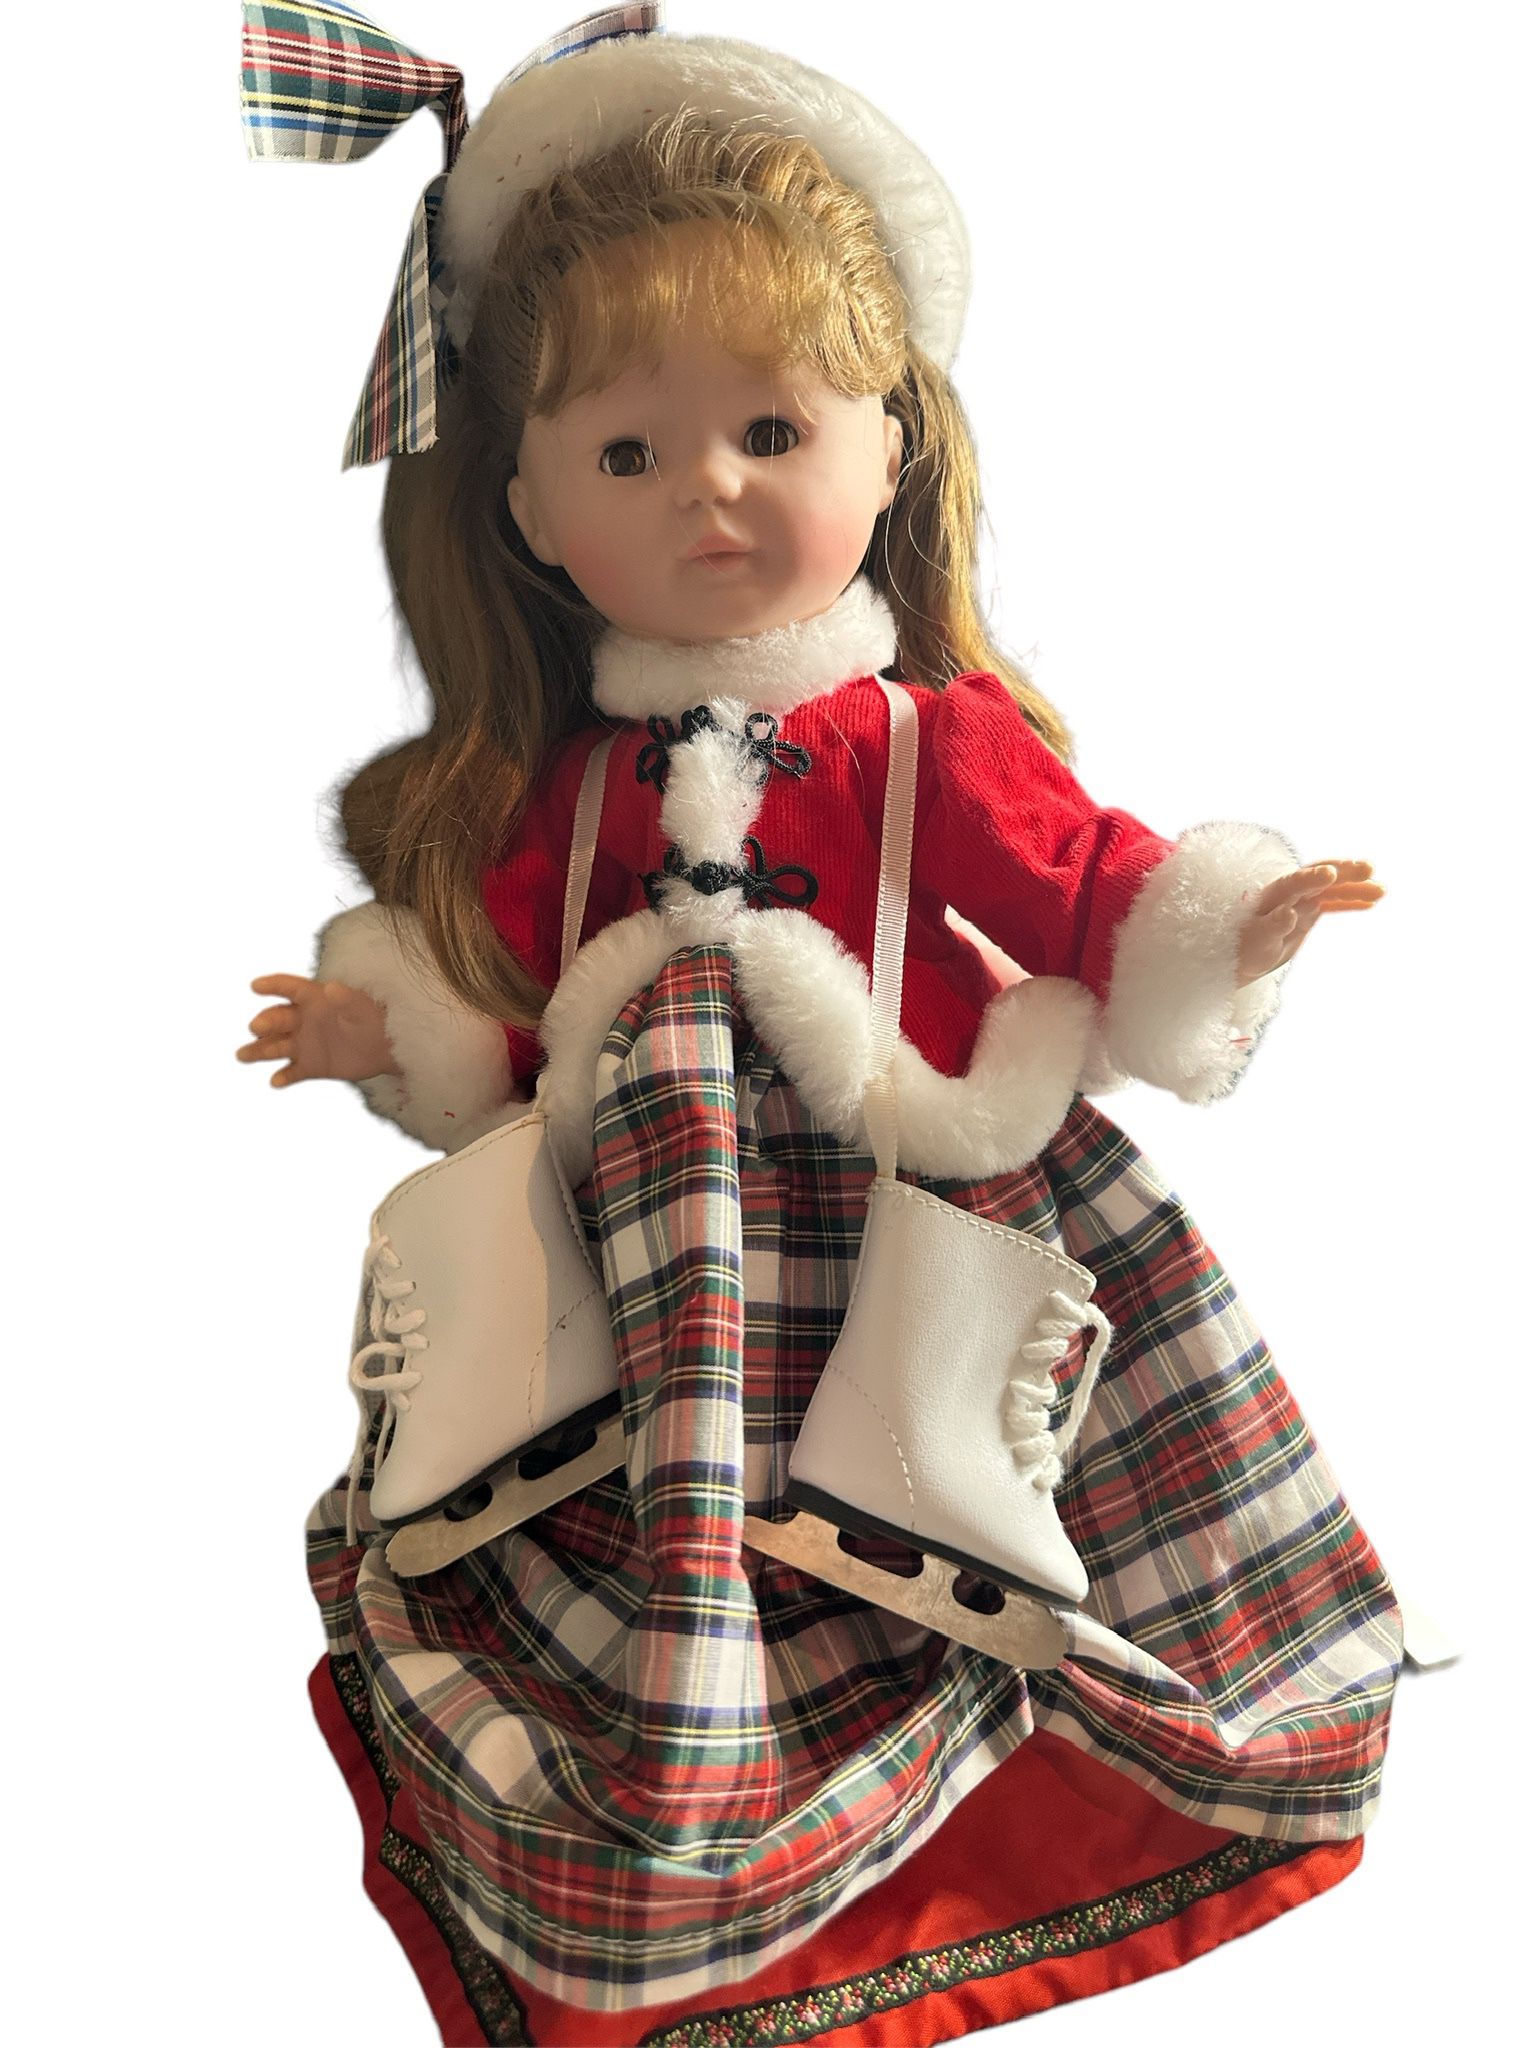 Doll 16” vinyl corolle les poured 1988 Christmas French play doll no original box. T-195